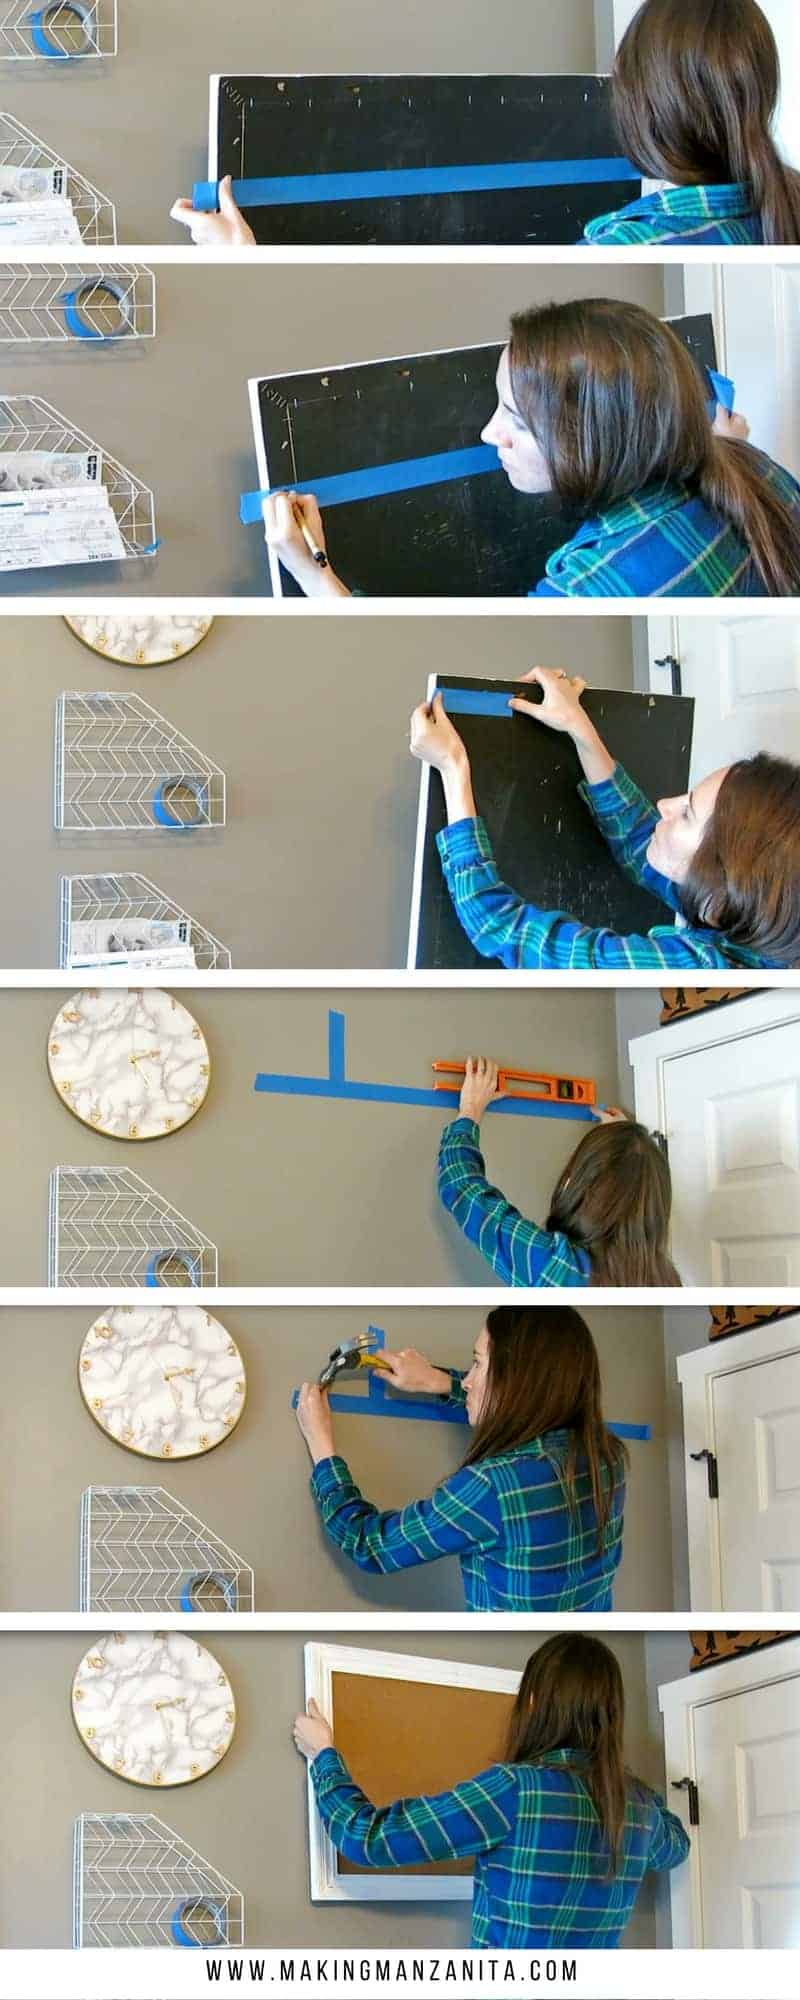 The Easy Way To Hang A Picture | How To Hang A Picture | Using Painter's Tape to Hang A Picture | Picture Hanging Tips | How to Hang Wall Decor | Picture Hanging Hack | How to hang art on your walls | Frame hanging tutorial | Simple way to hang picture on your walls | How to hang up wall decor | Hanging pictures on your walls | Use Painter's Tape to mark holes on your wall to hang up pictures